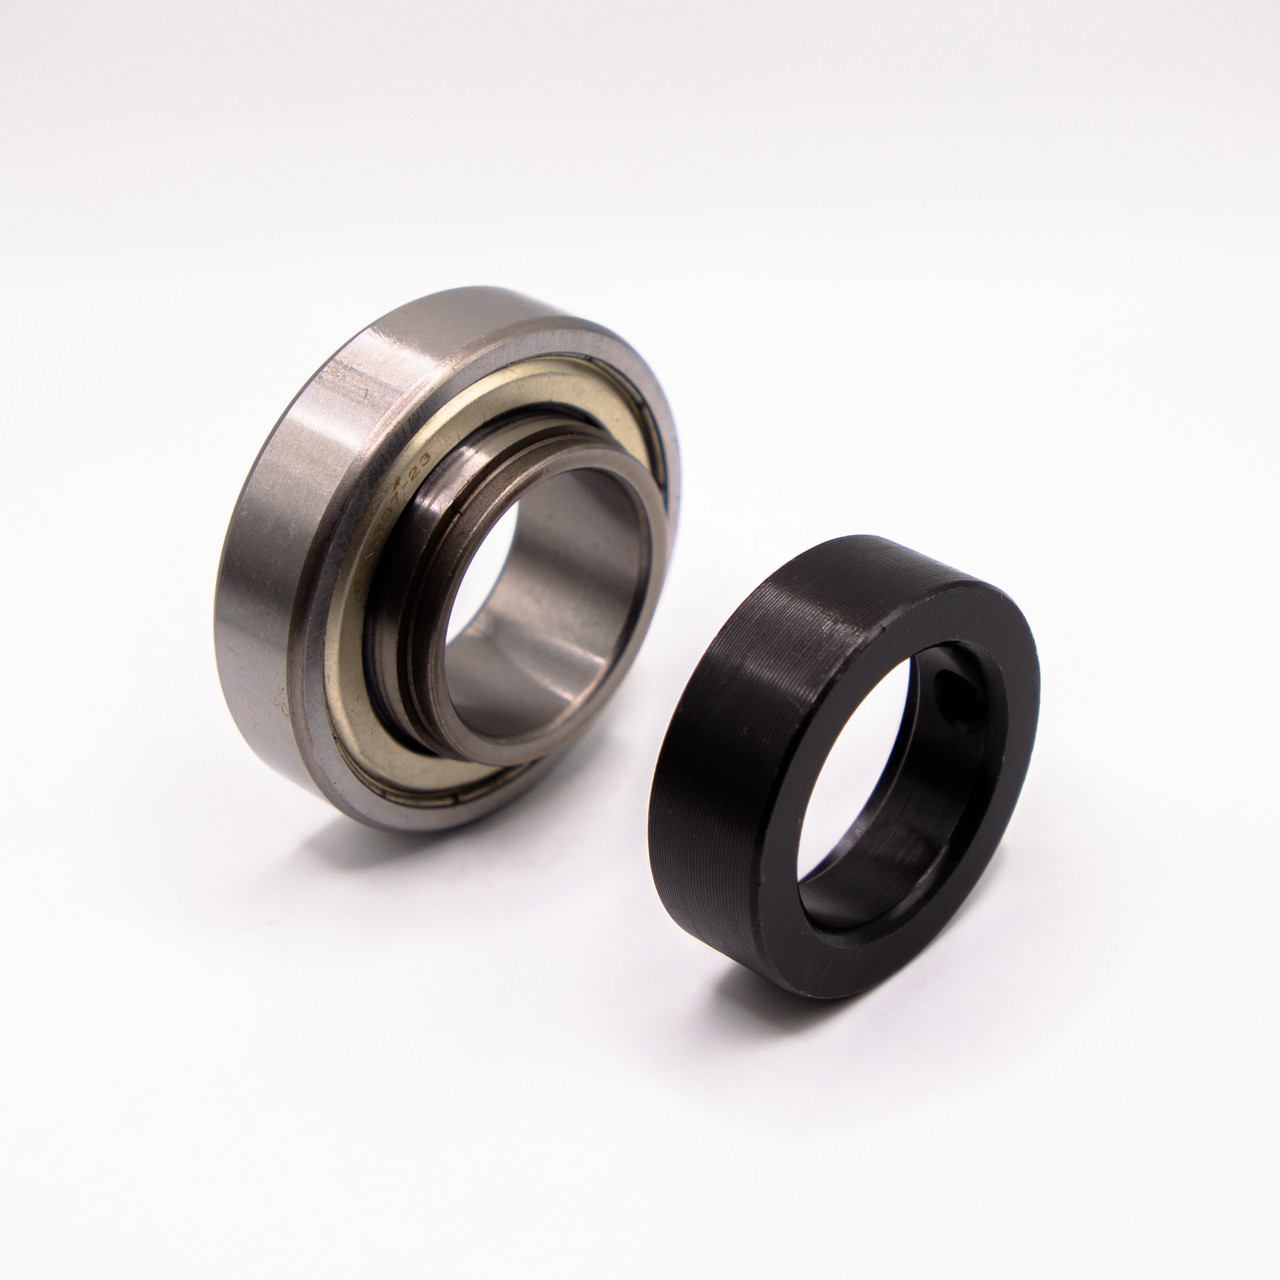 CSA205-16 Insert Ball Bearing 1x52x31.5 Separated Side View